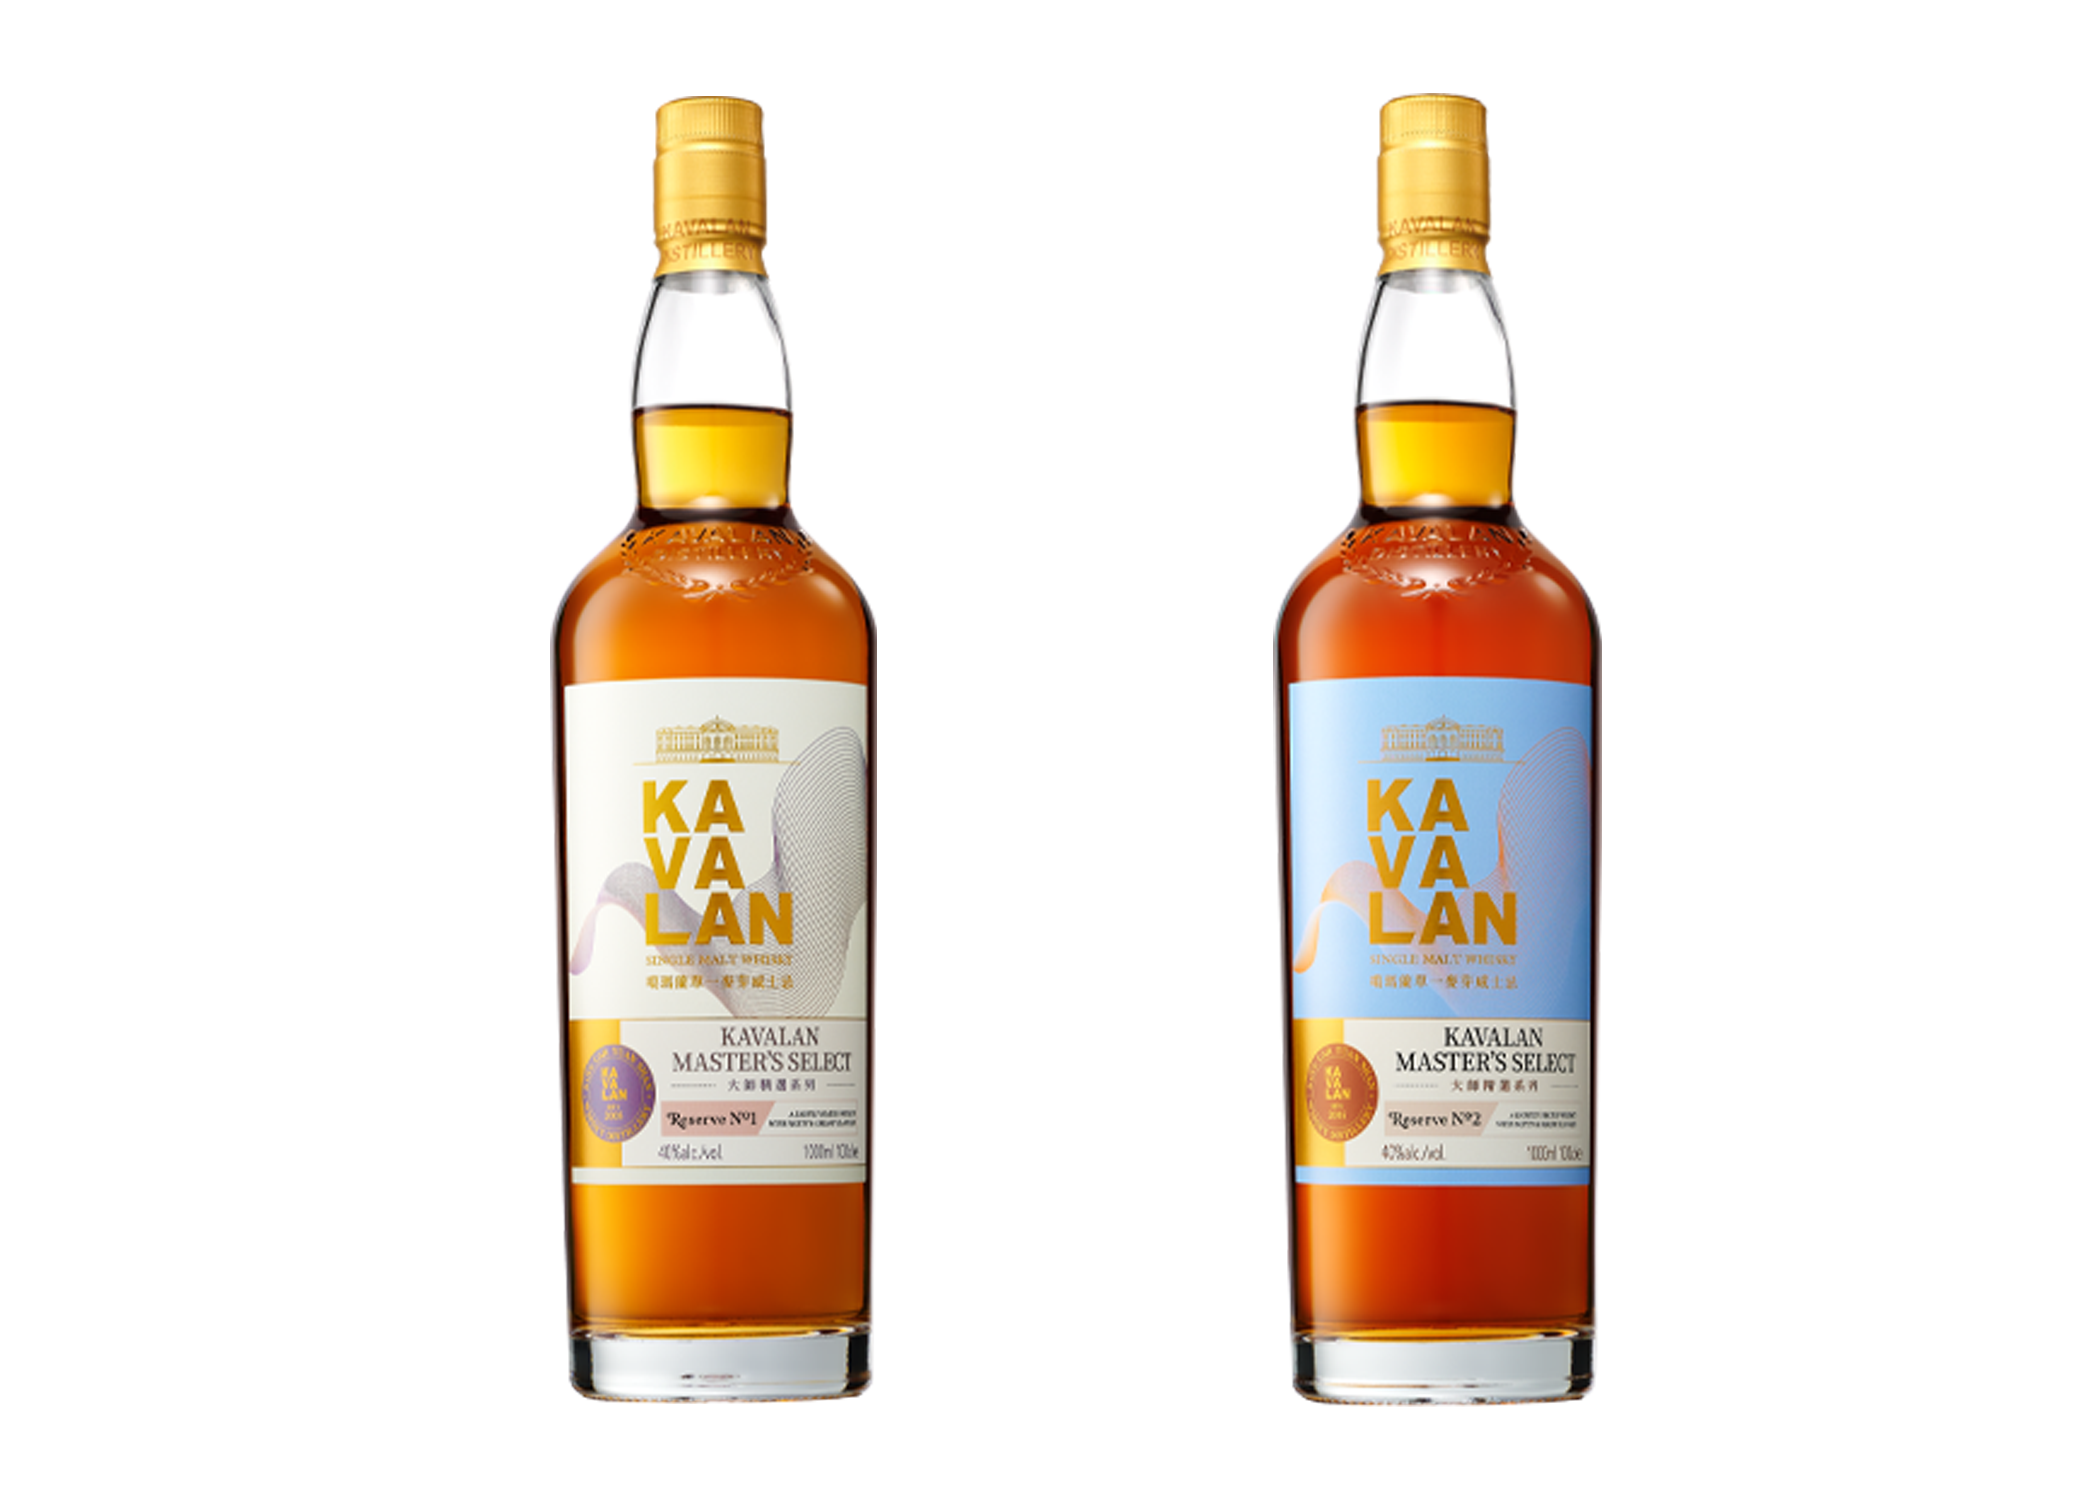 Kavalan is proud to announce the launch of two exclusive whiskies, combining lightly heated STR casks with ex-bourbon barrels port barriques respectively.